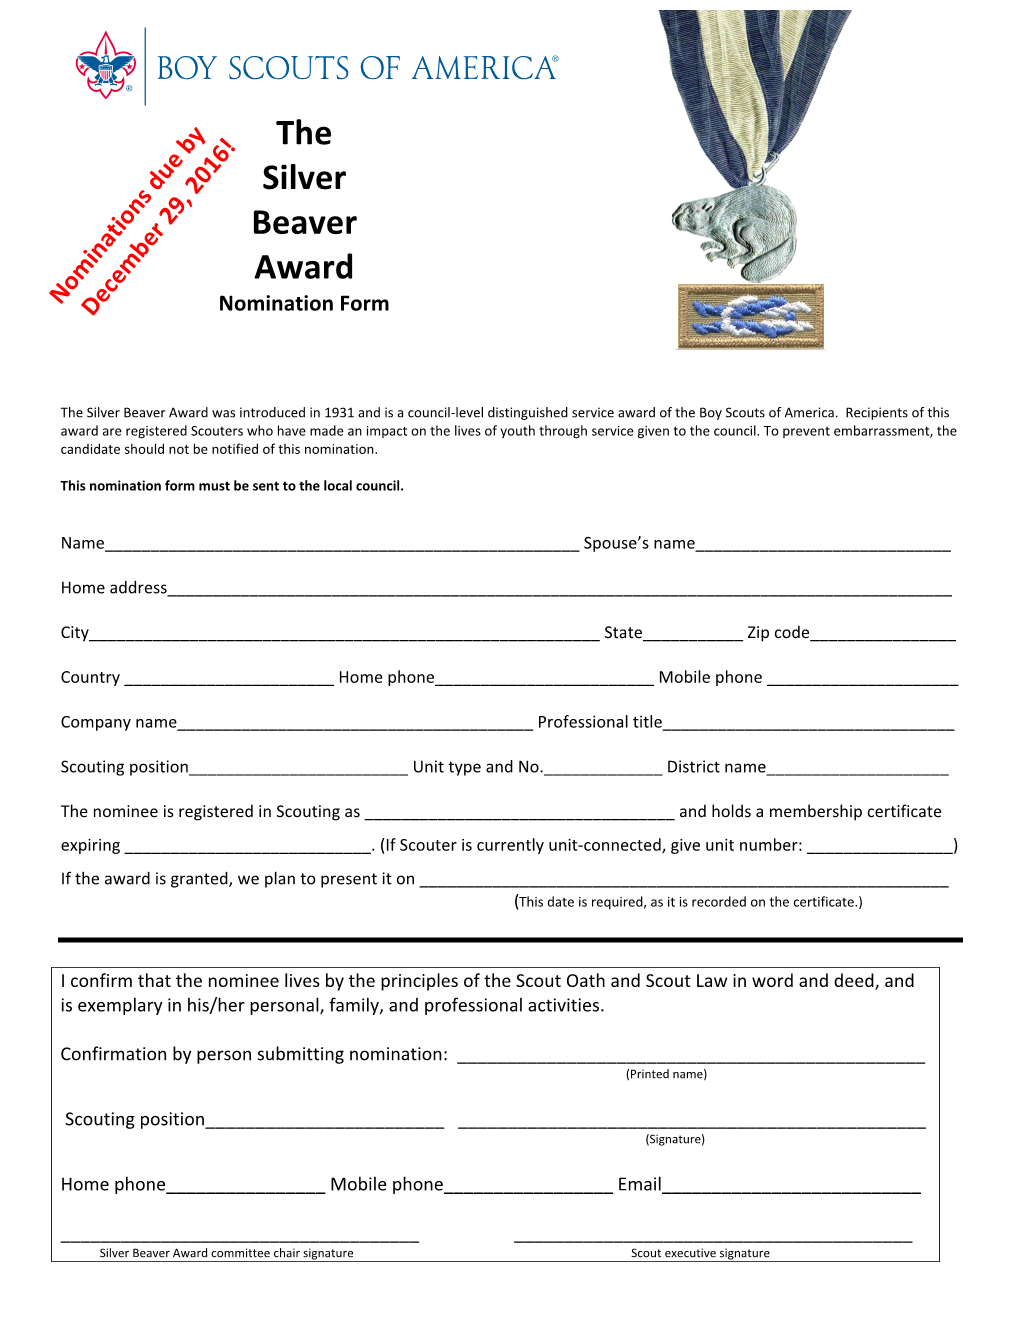 The Silver Beaver Award Nominations Due by December 29, 2016!Nomination Form